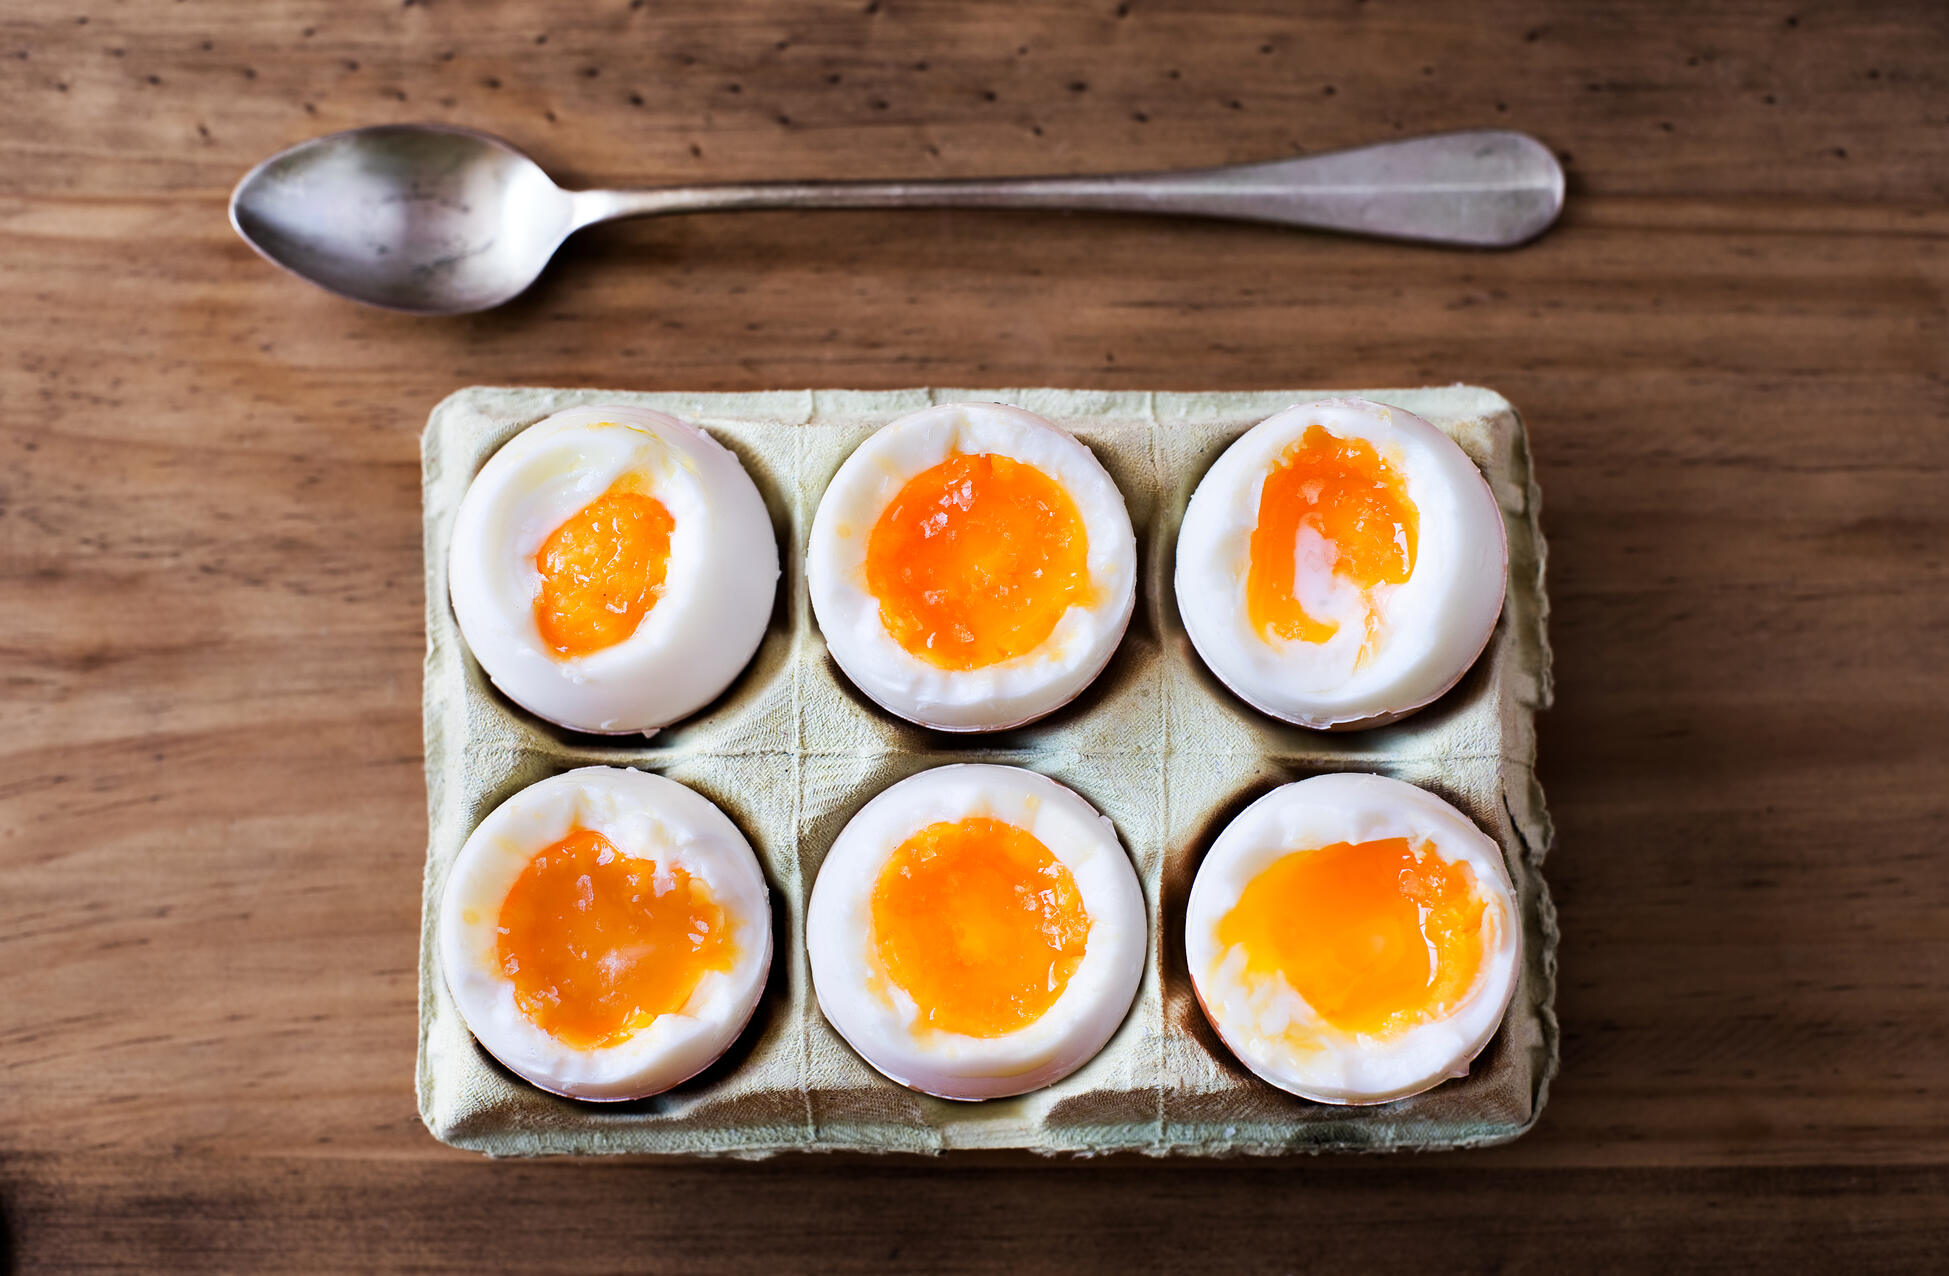 https://recipes.net/wp-content/uploads/2023/10/how-to-cook-a-hard-boiled-egg-in-the-microwave-1696659688.jpg